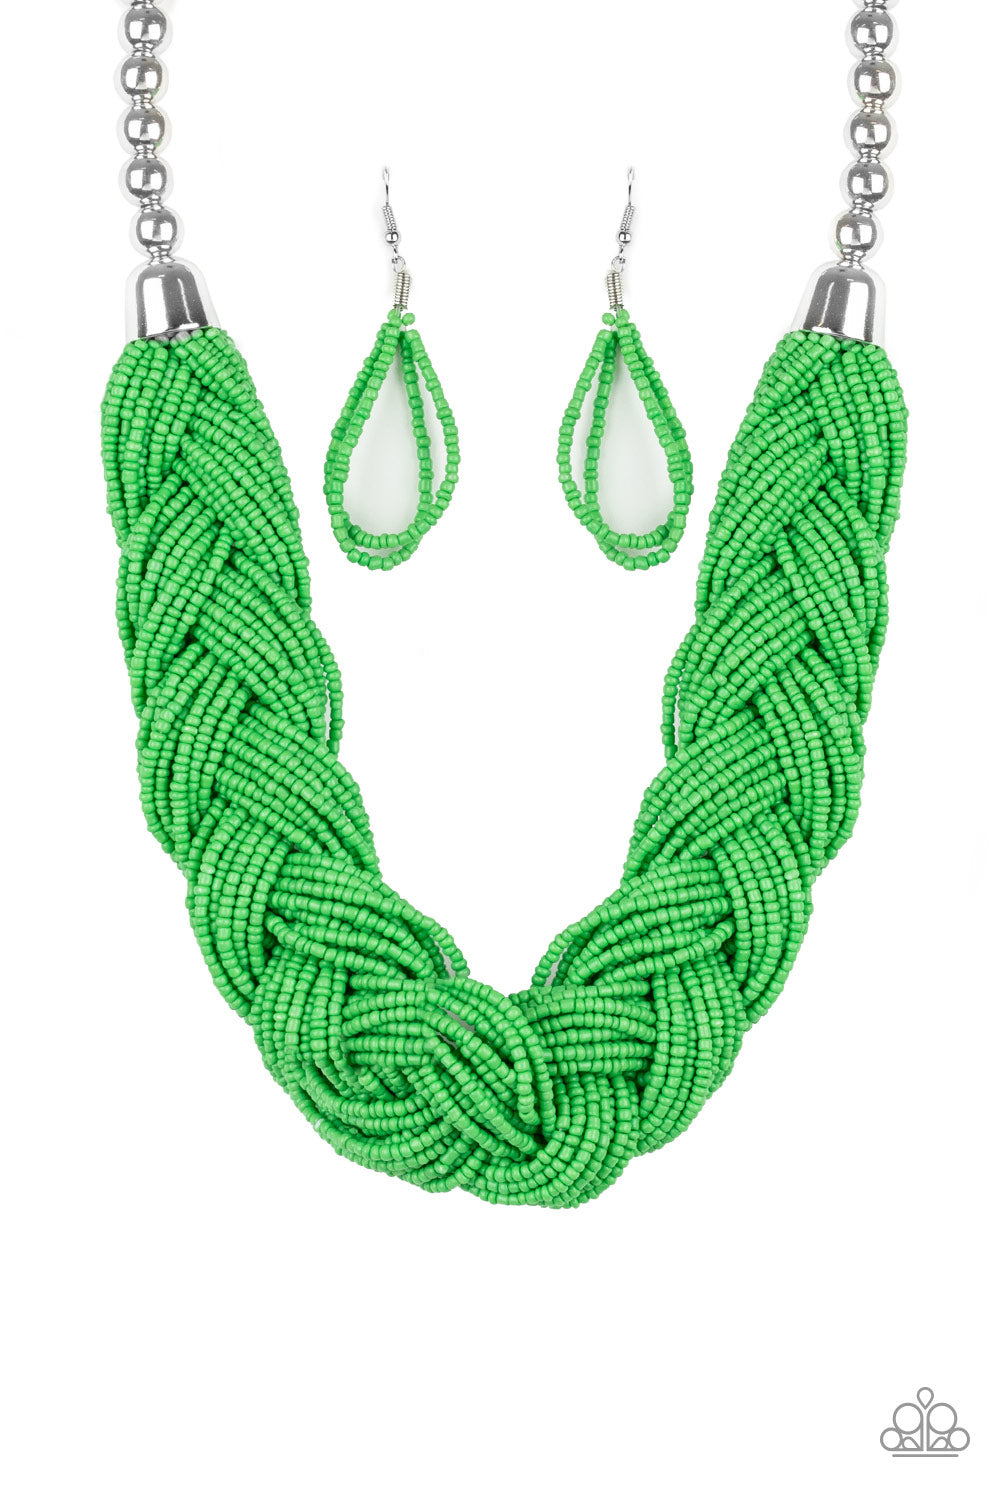 five-dollar-jewelry-the-great-outback-green-1661-paparazzi-accessories